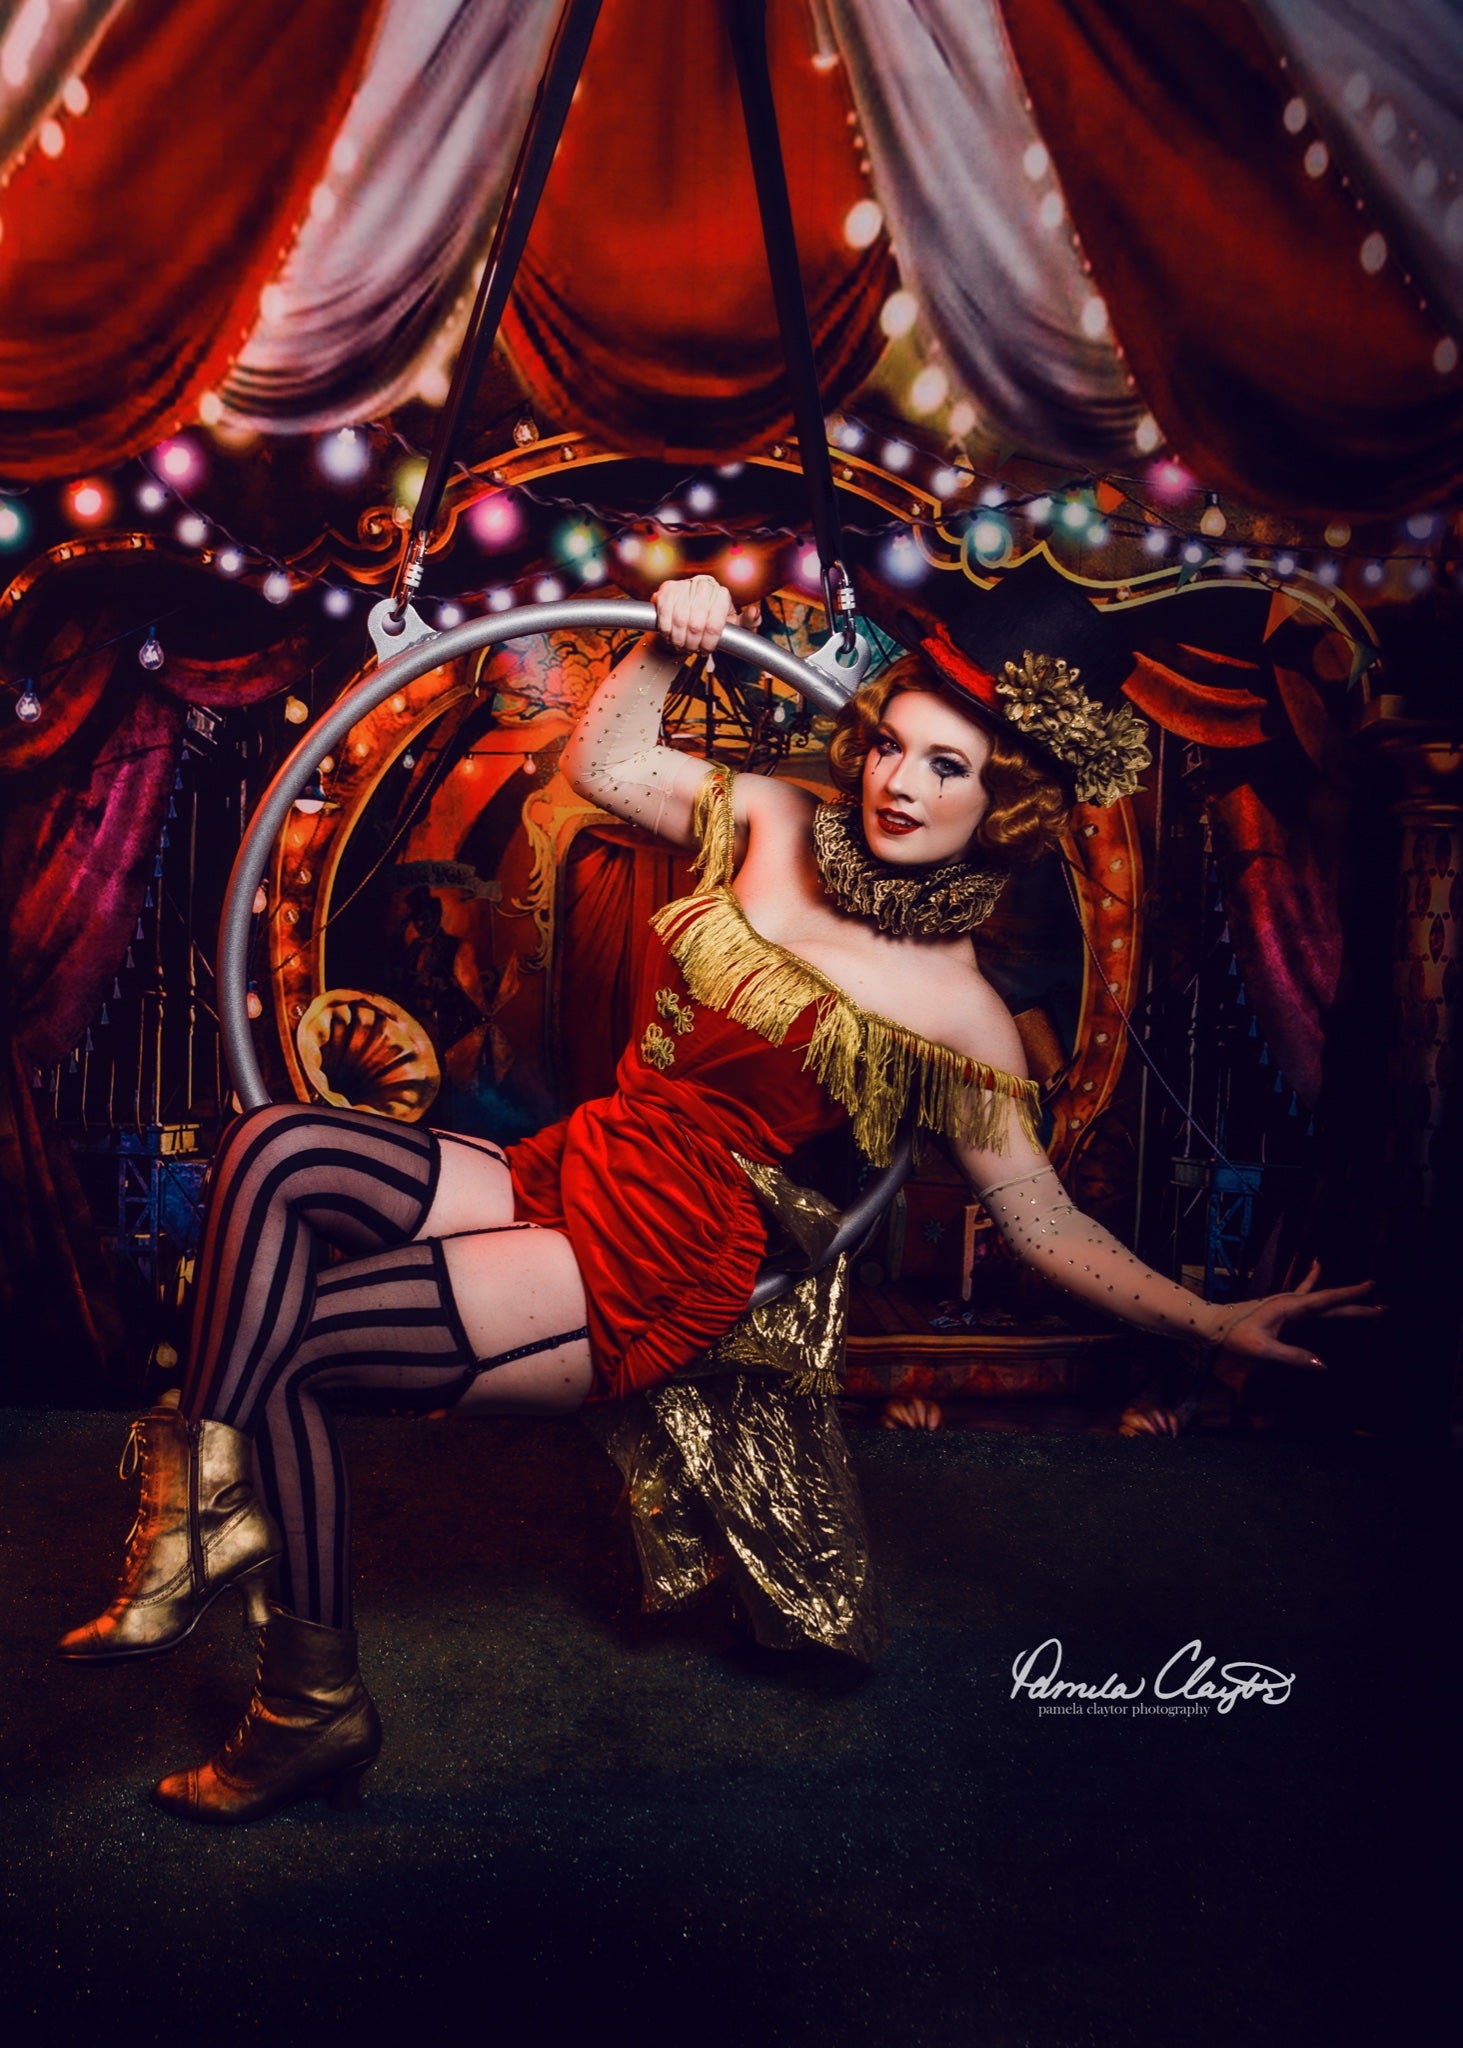 Kate Circus Backdrop Designed by Rosabell Photography